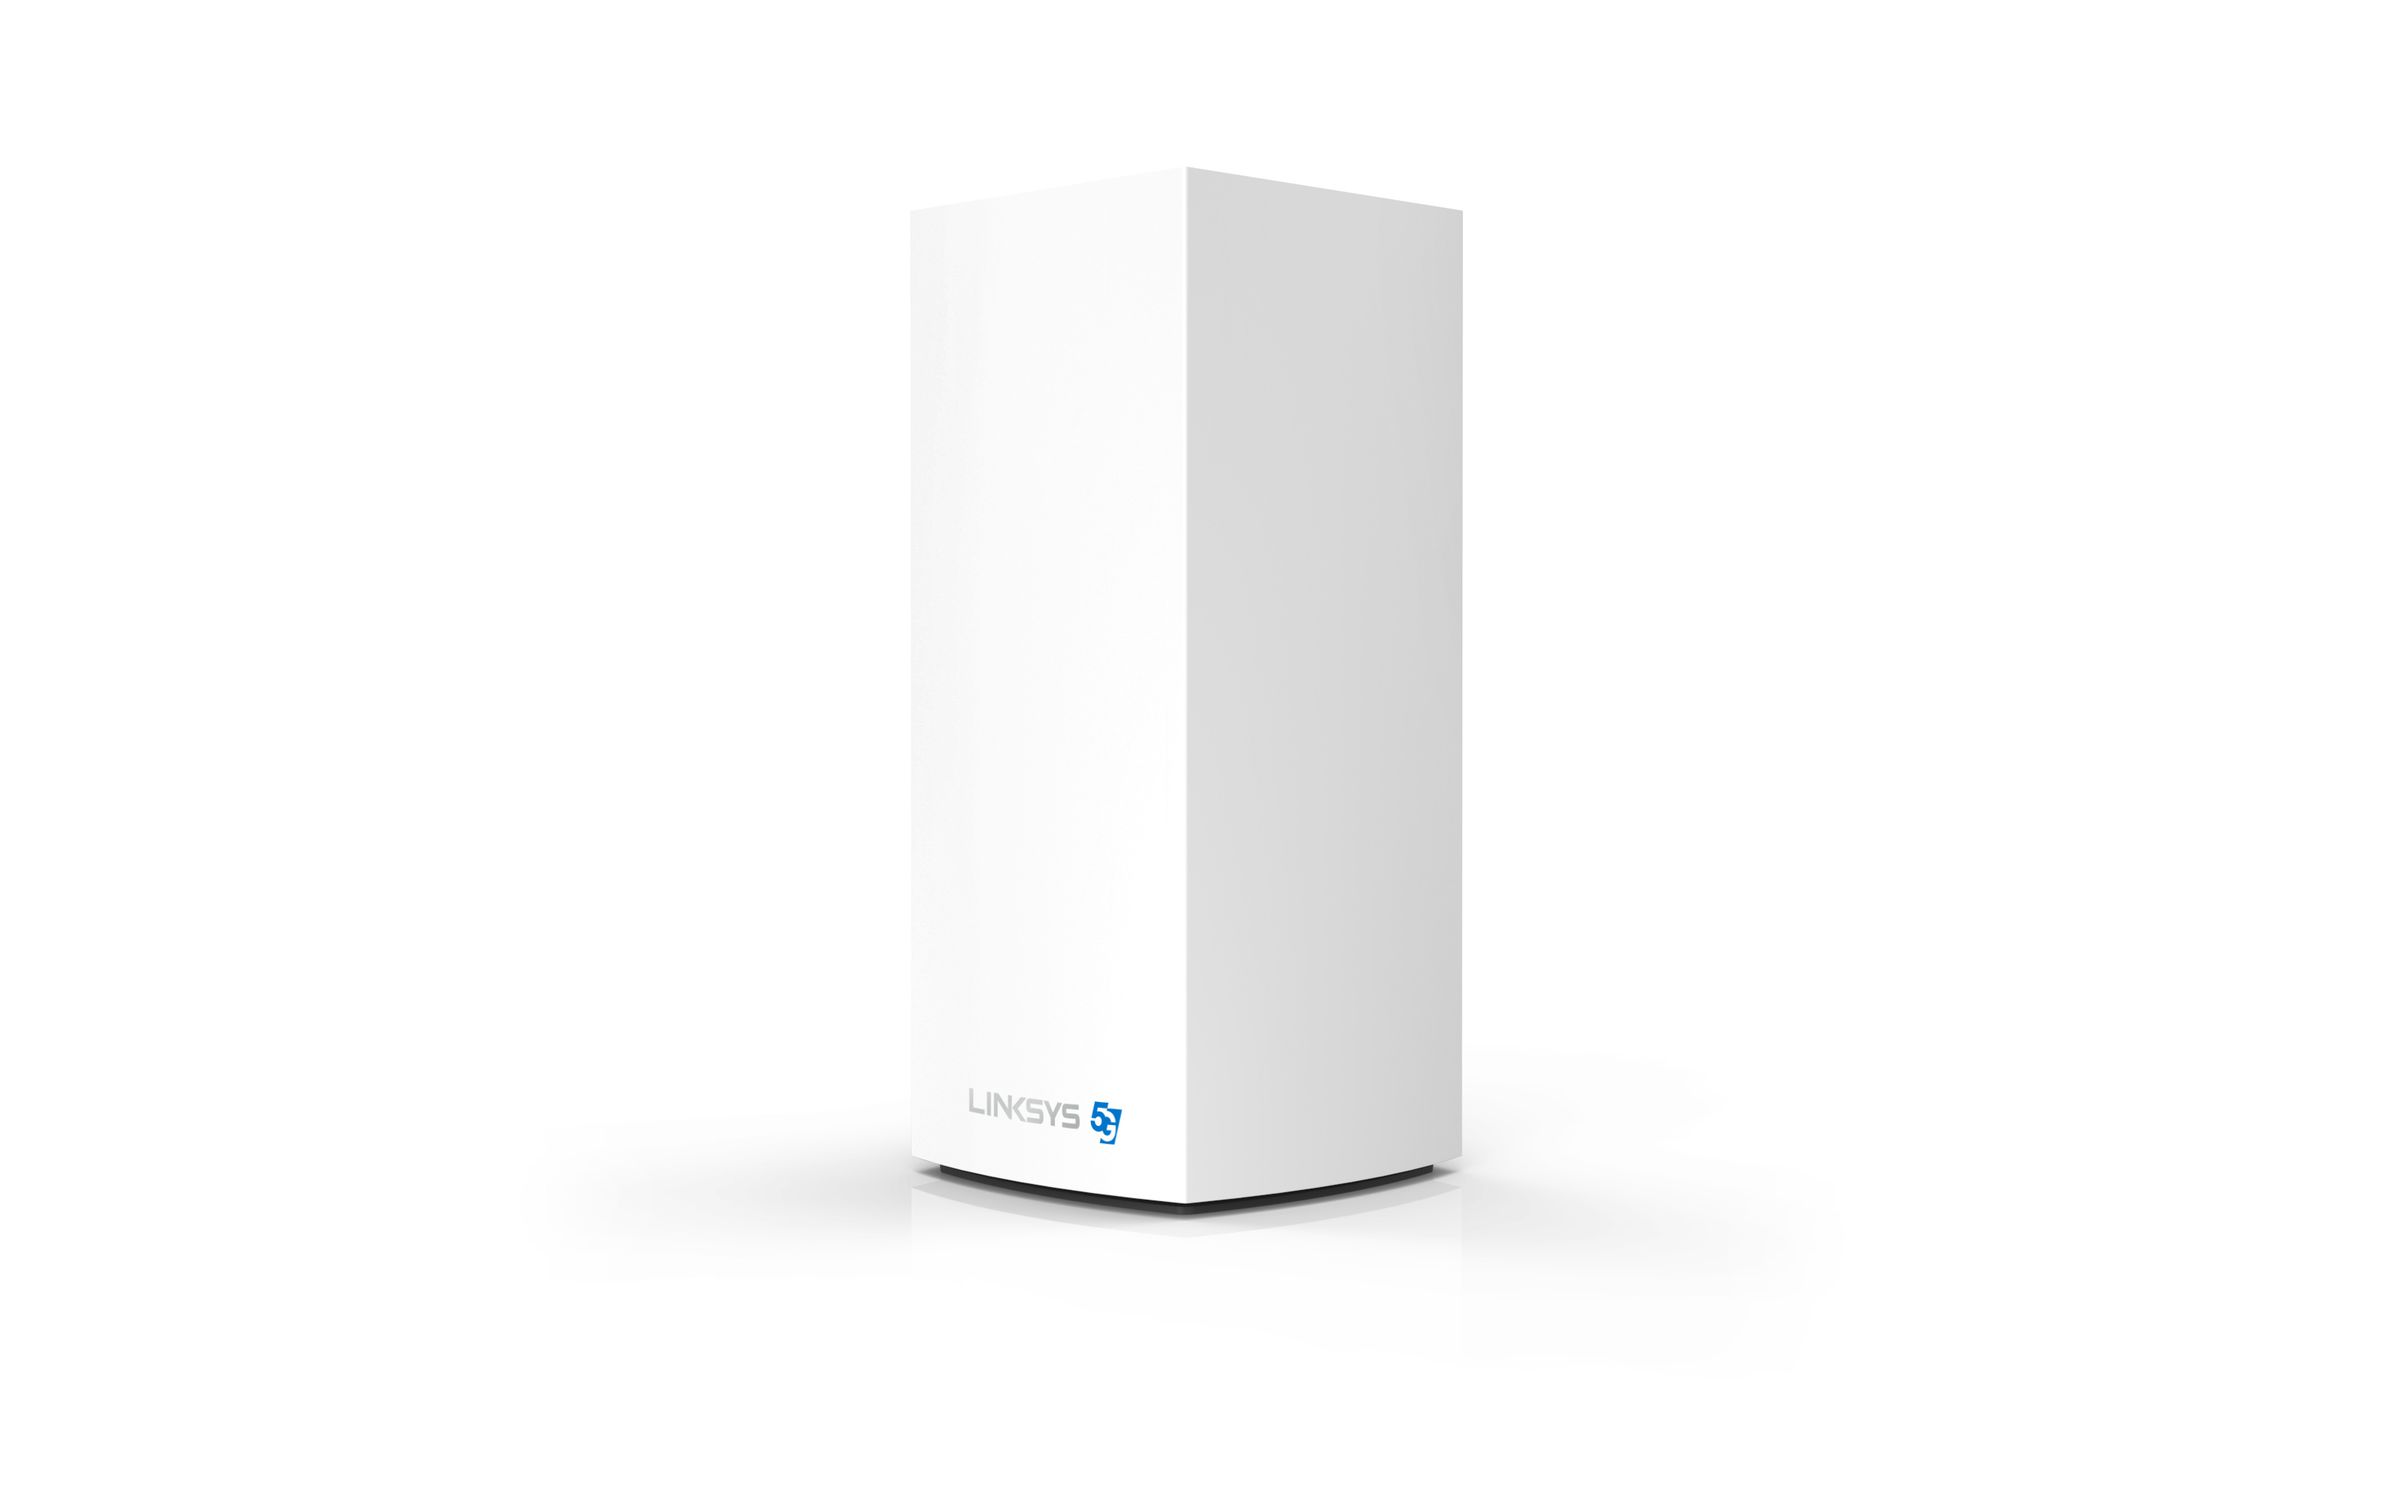 Linksys’ Velop 5G Mesh Gateway works with the rest of its Velop mesh system, while also bringing 5G into the home if you somehow have a connection. There’s no pricing or release date yet.